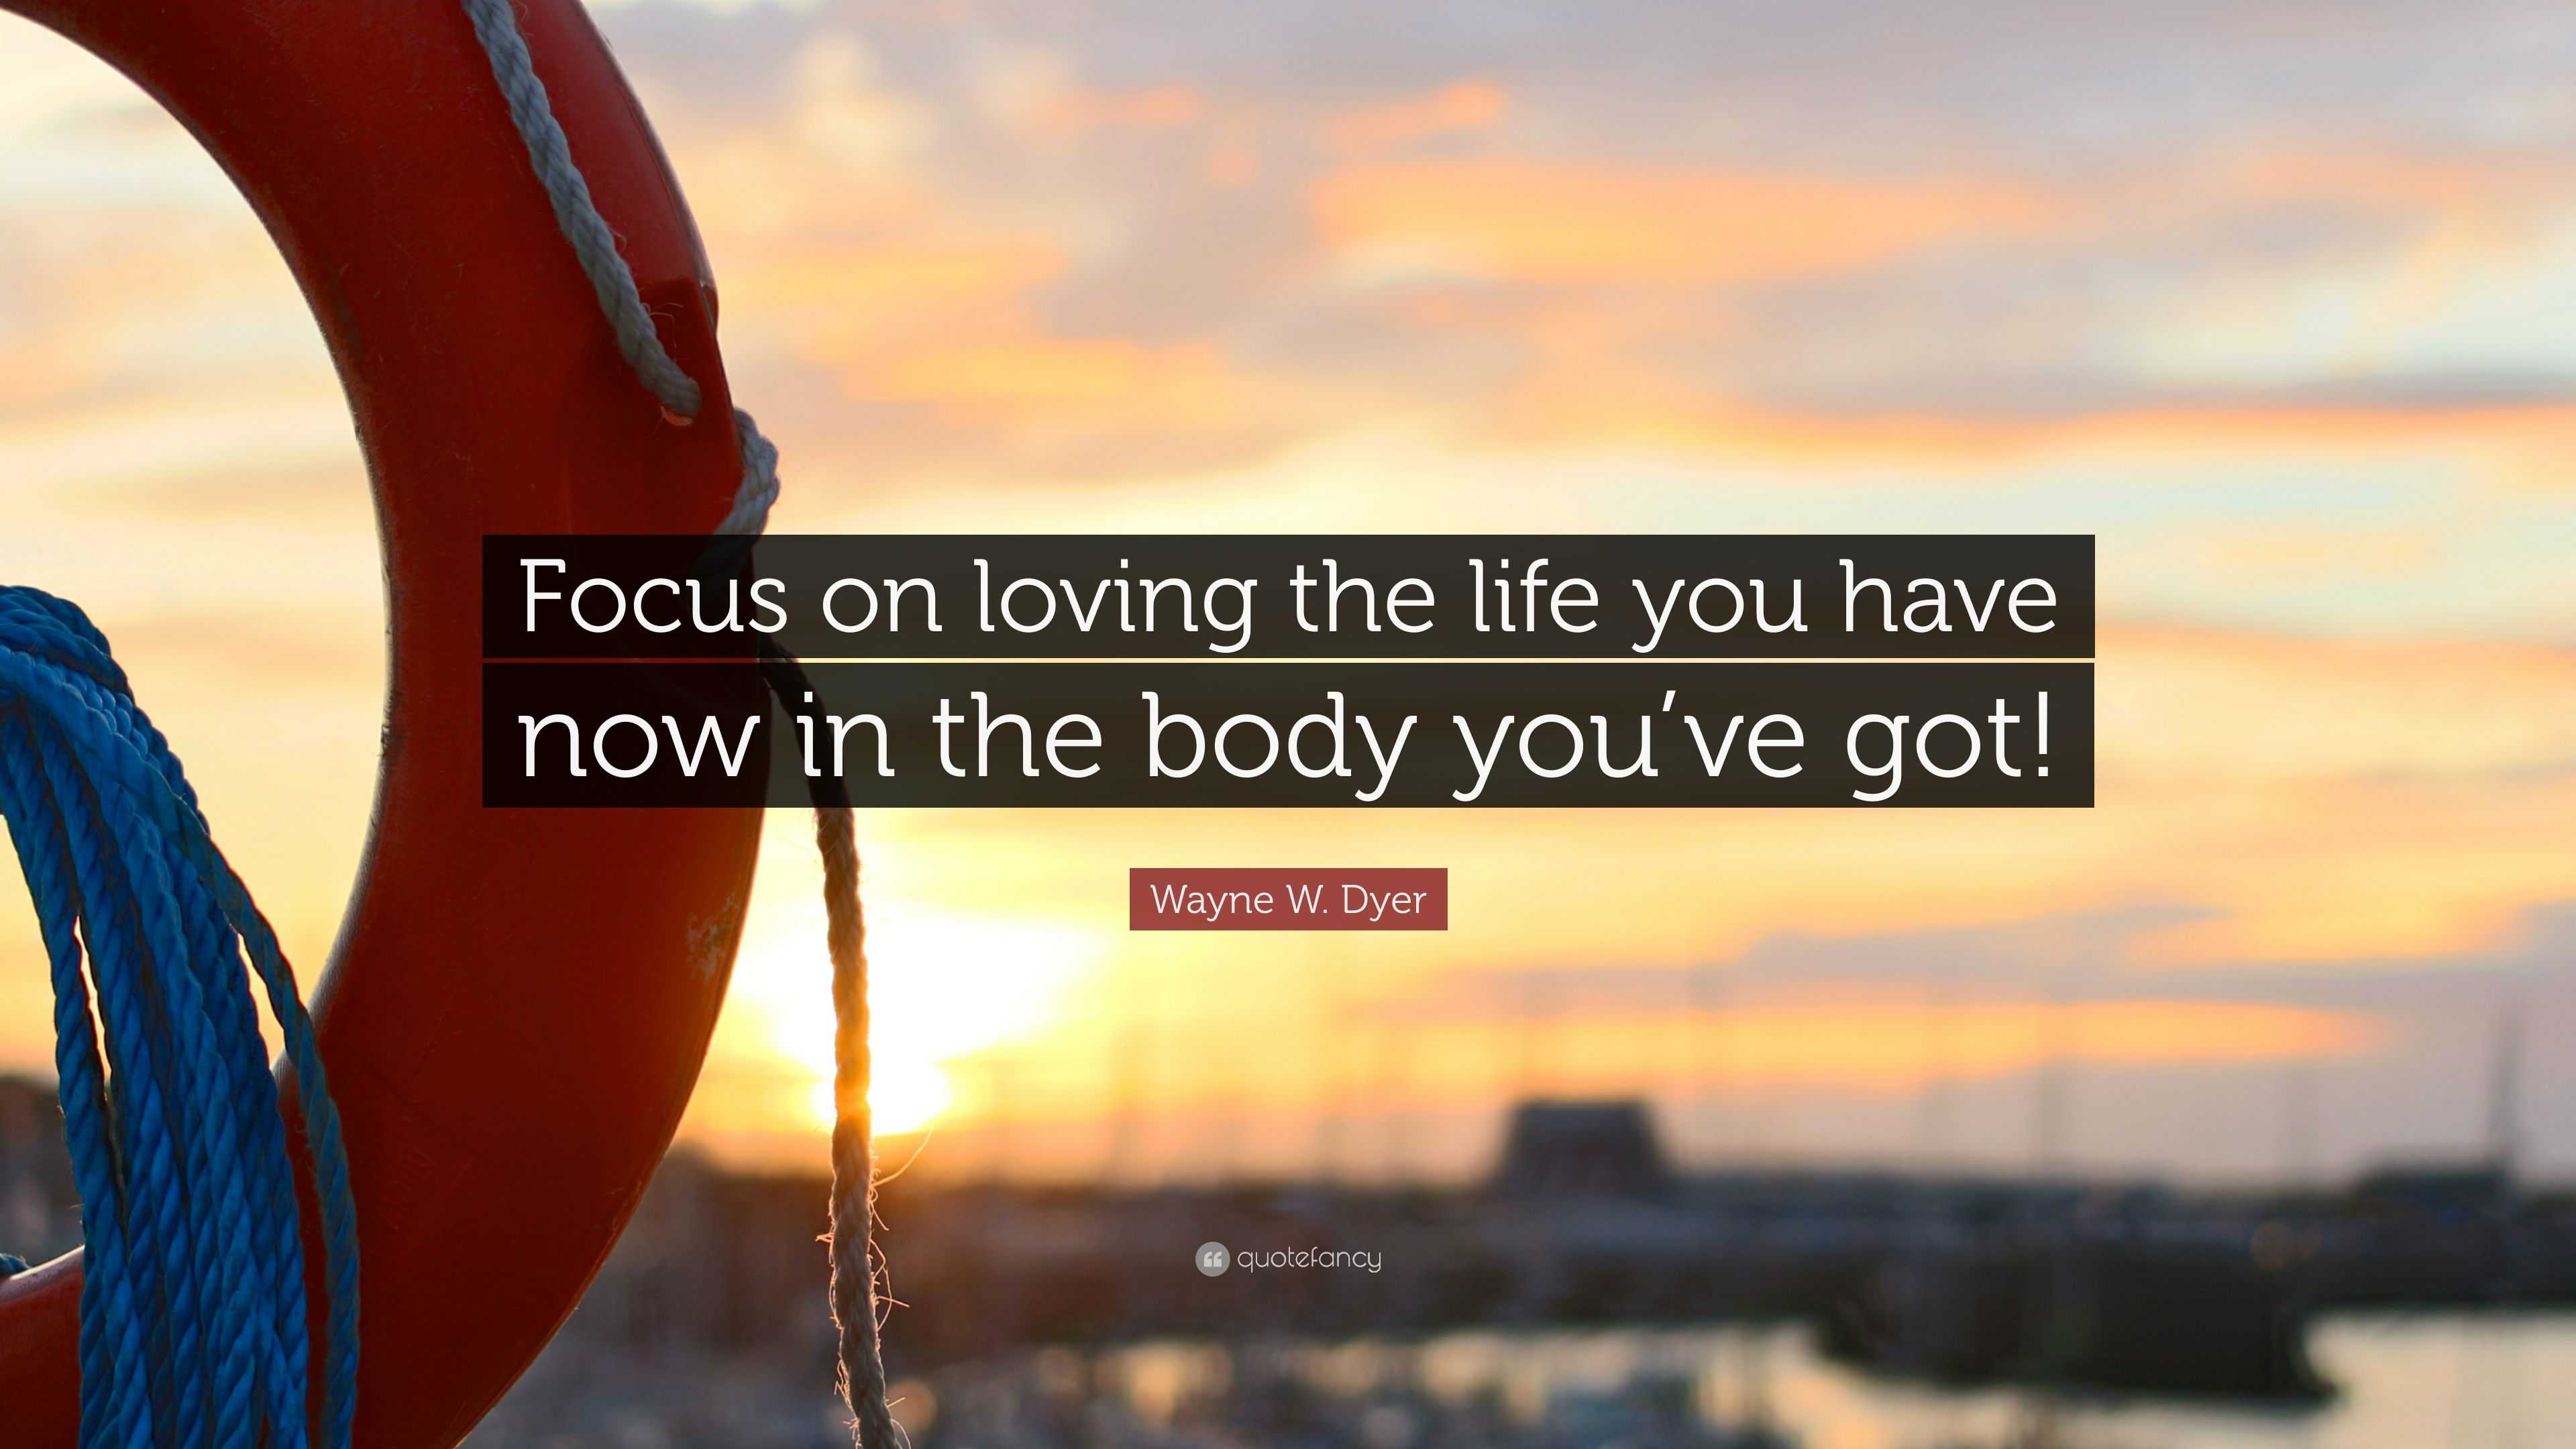 Wayne W Dyer Quote “Focus on loving the life you have now in